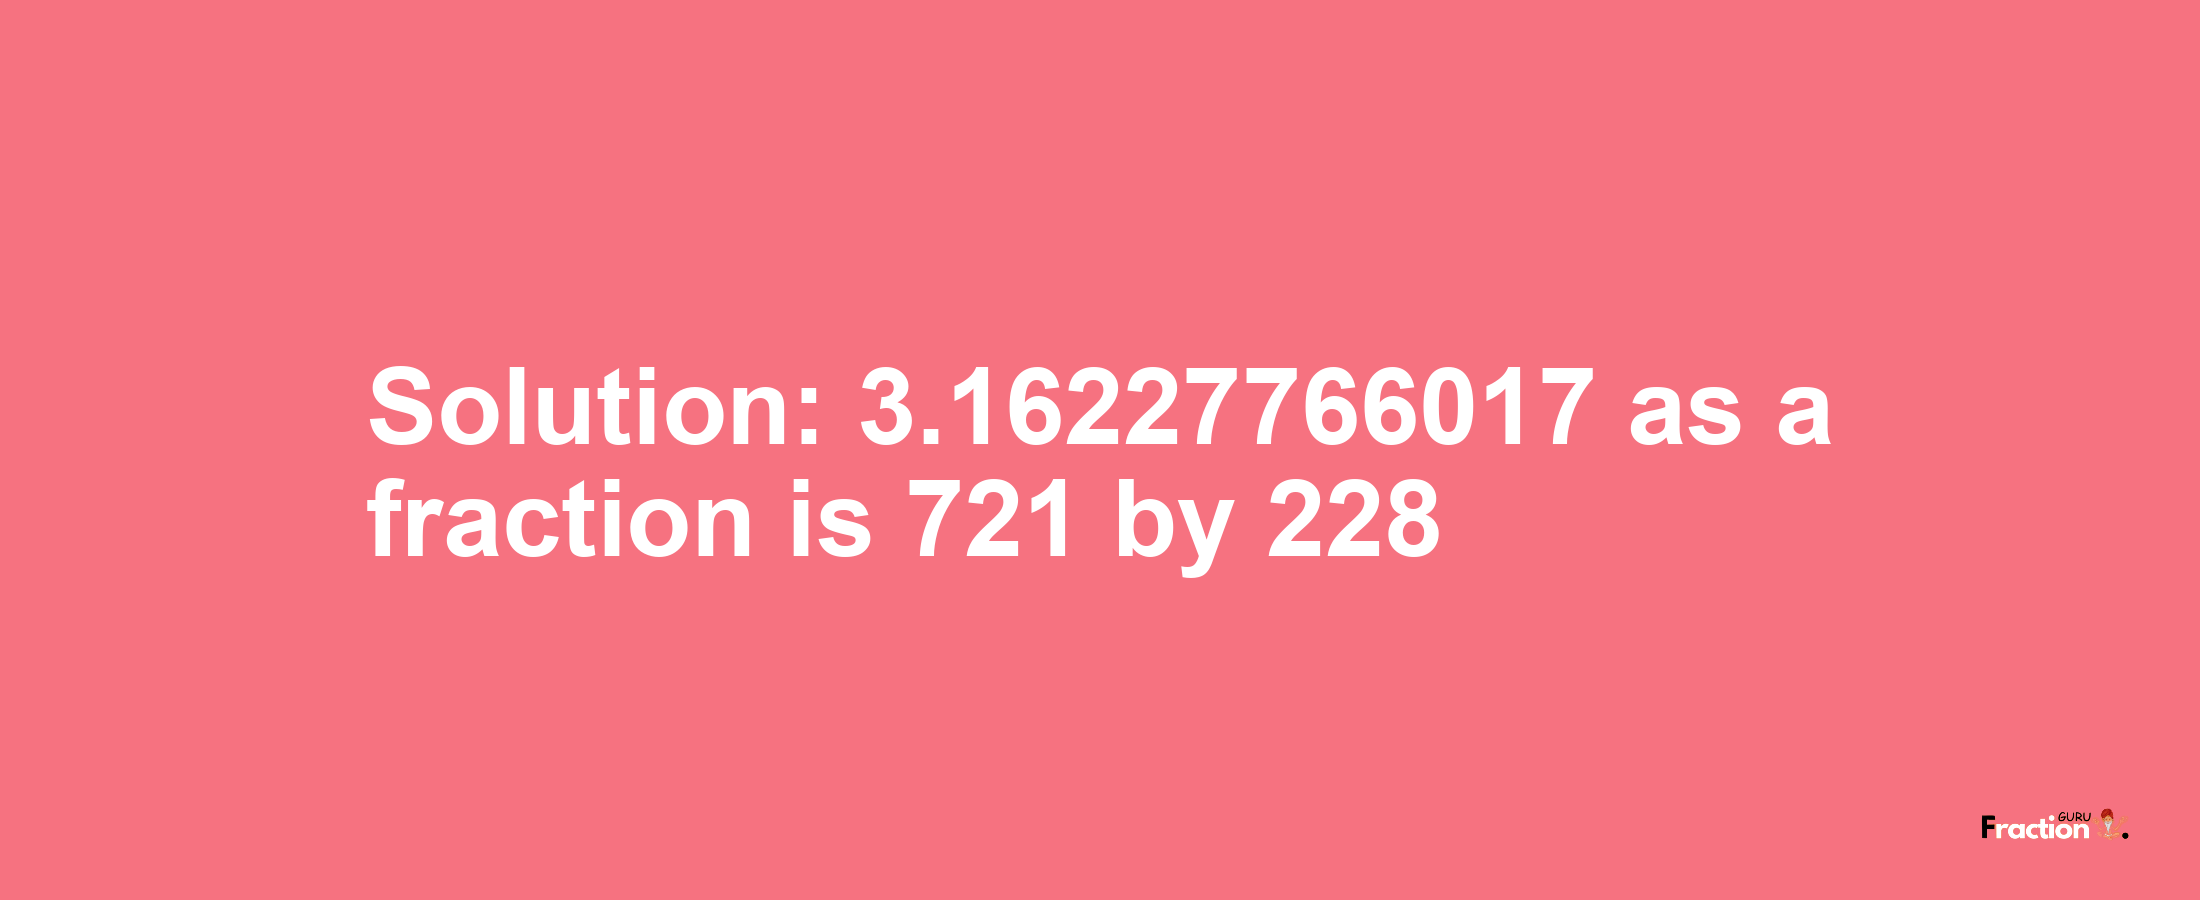 Solution:3.16227766017 as a fraction is 721/228